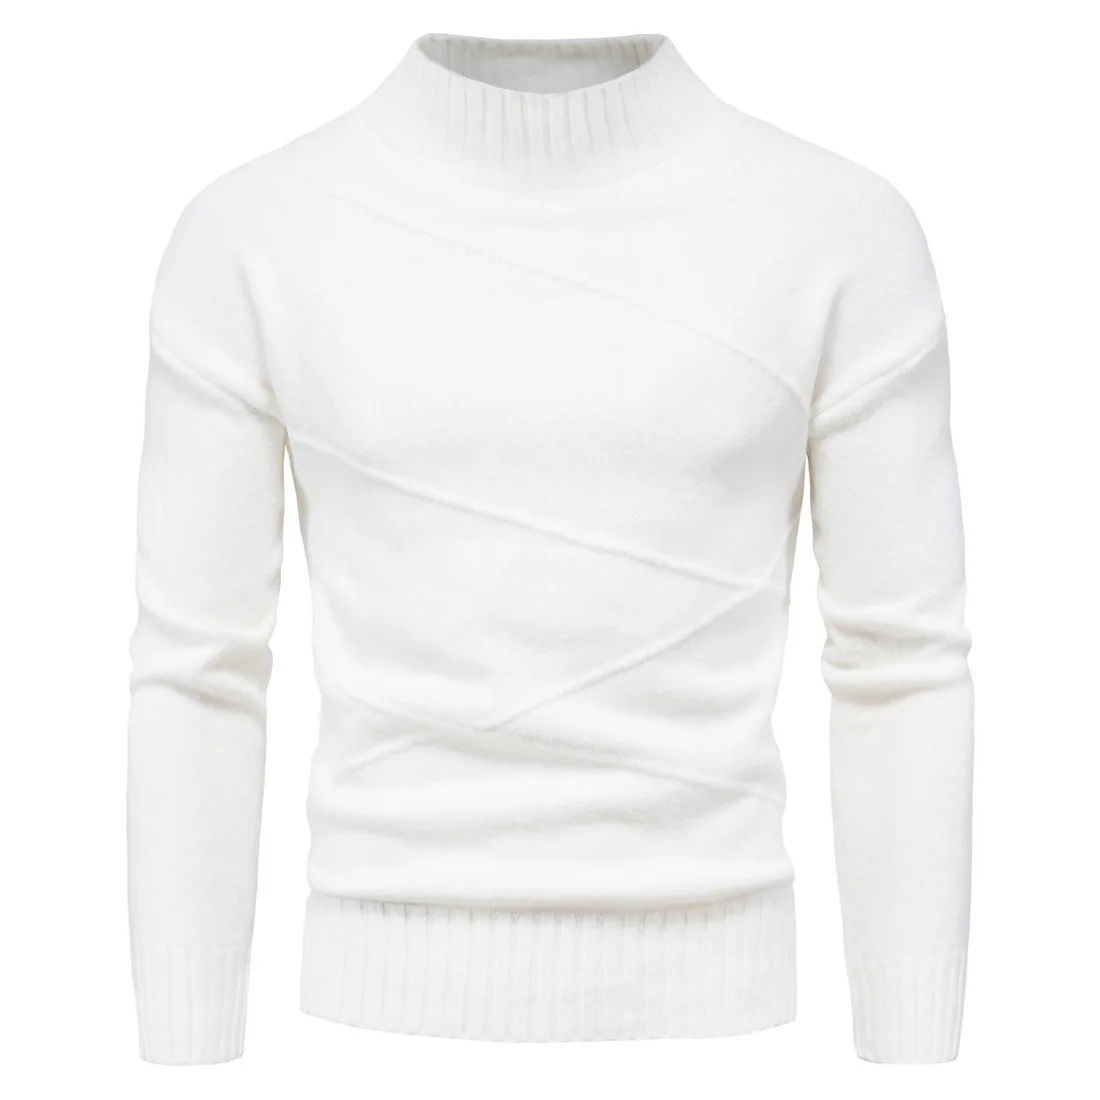 New Autumn Winter Men'S Sweater Men'S O-Neck Solid Color Casual Sweater